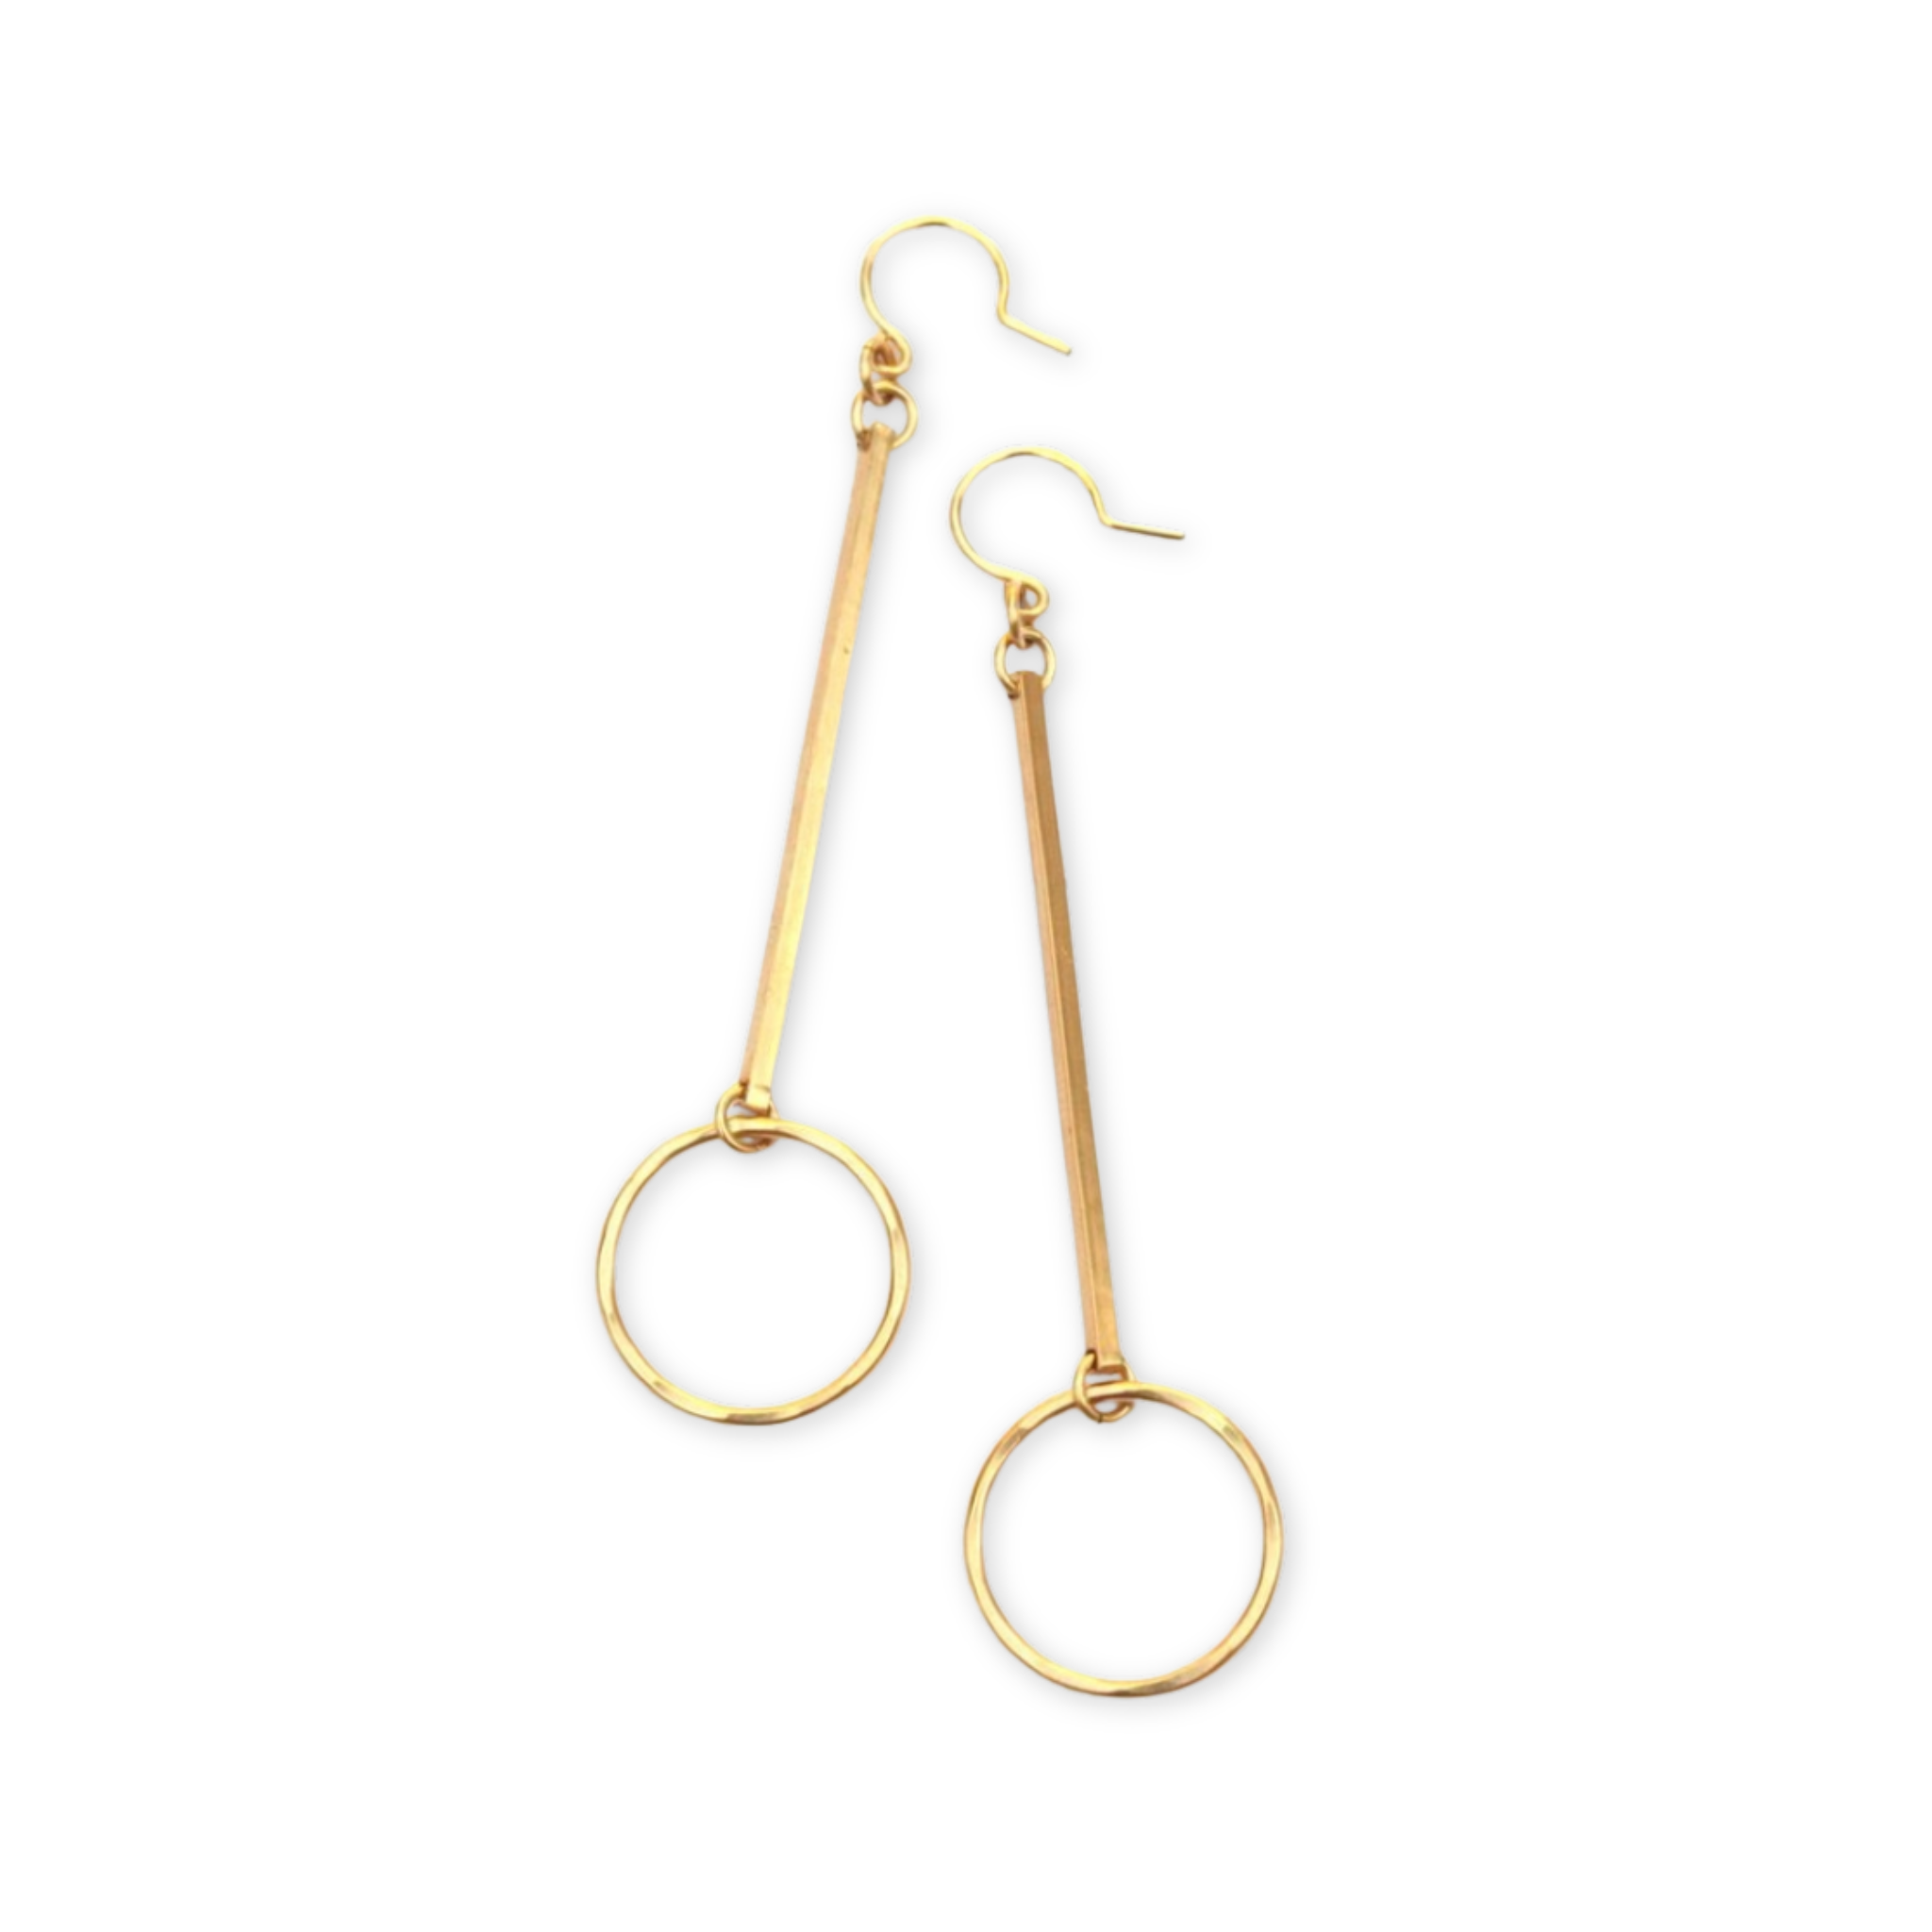 dangling earrings with a long thing stick of metal and a hanging open circle